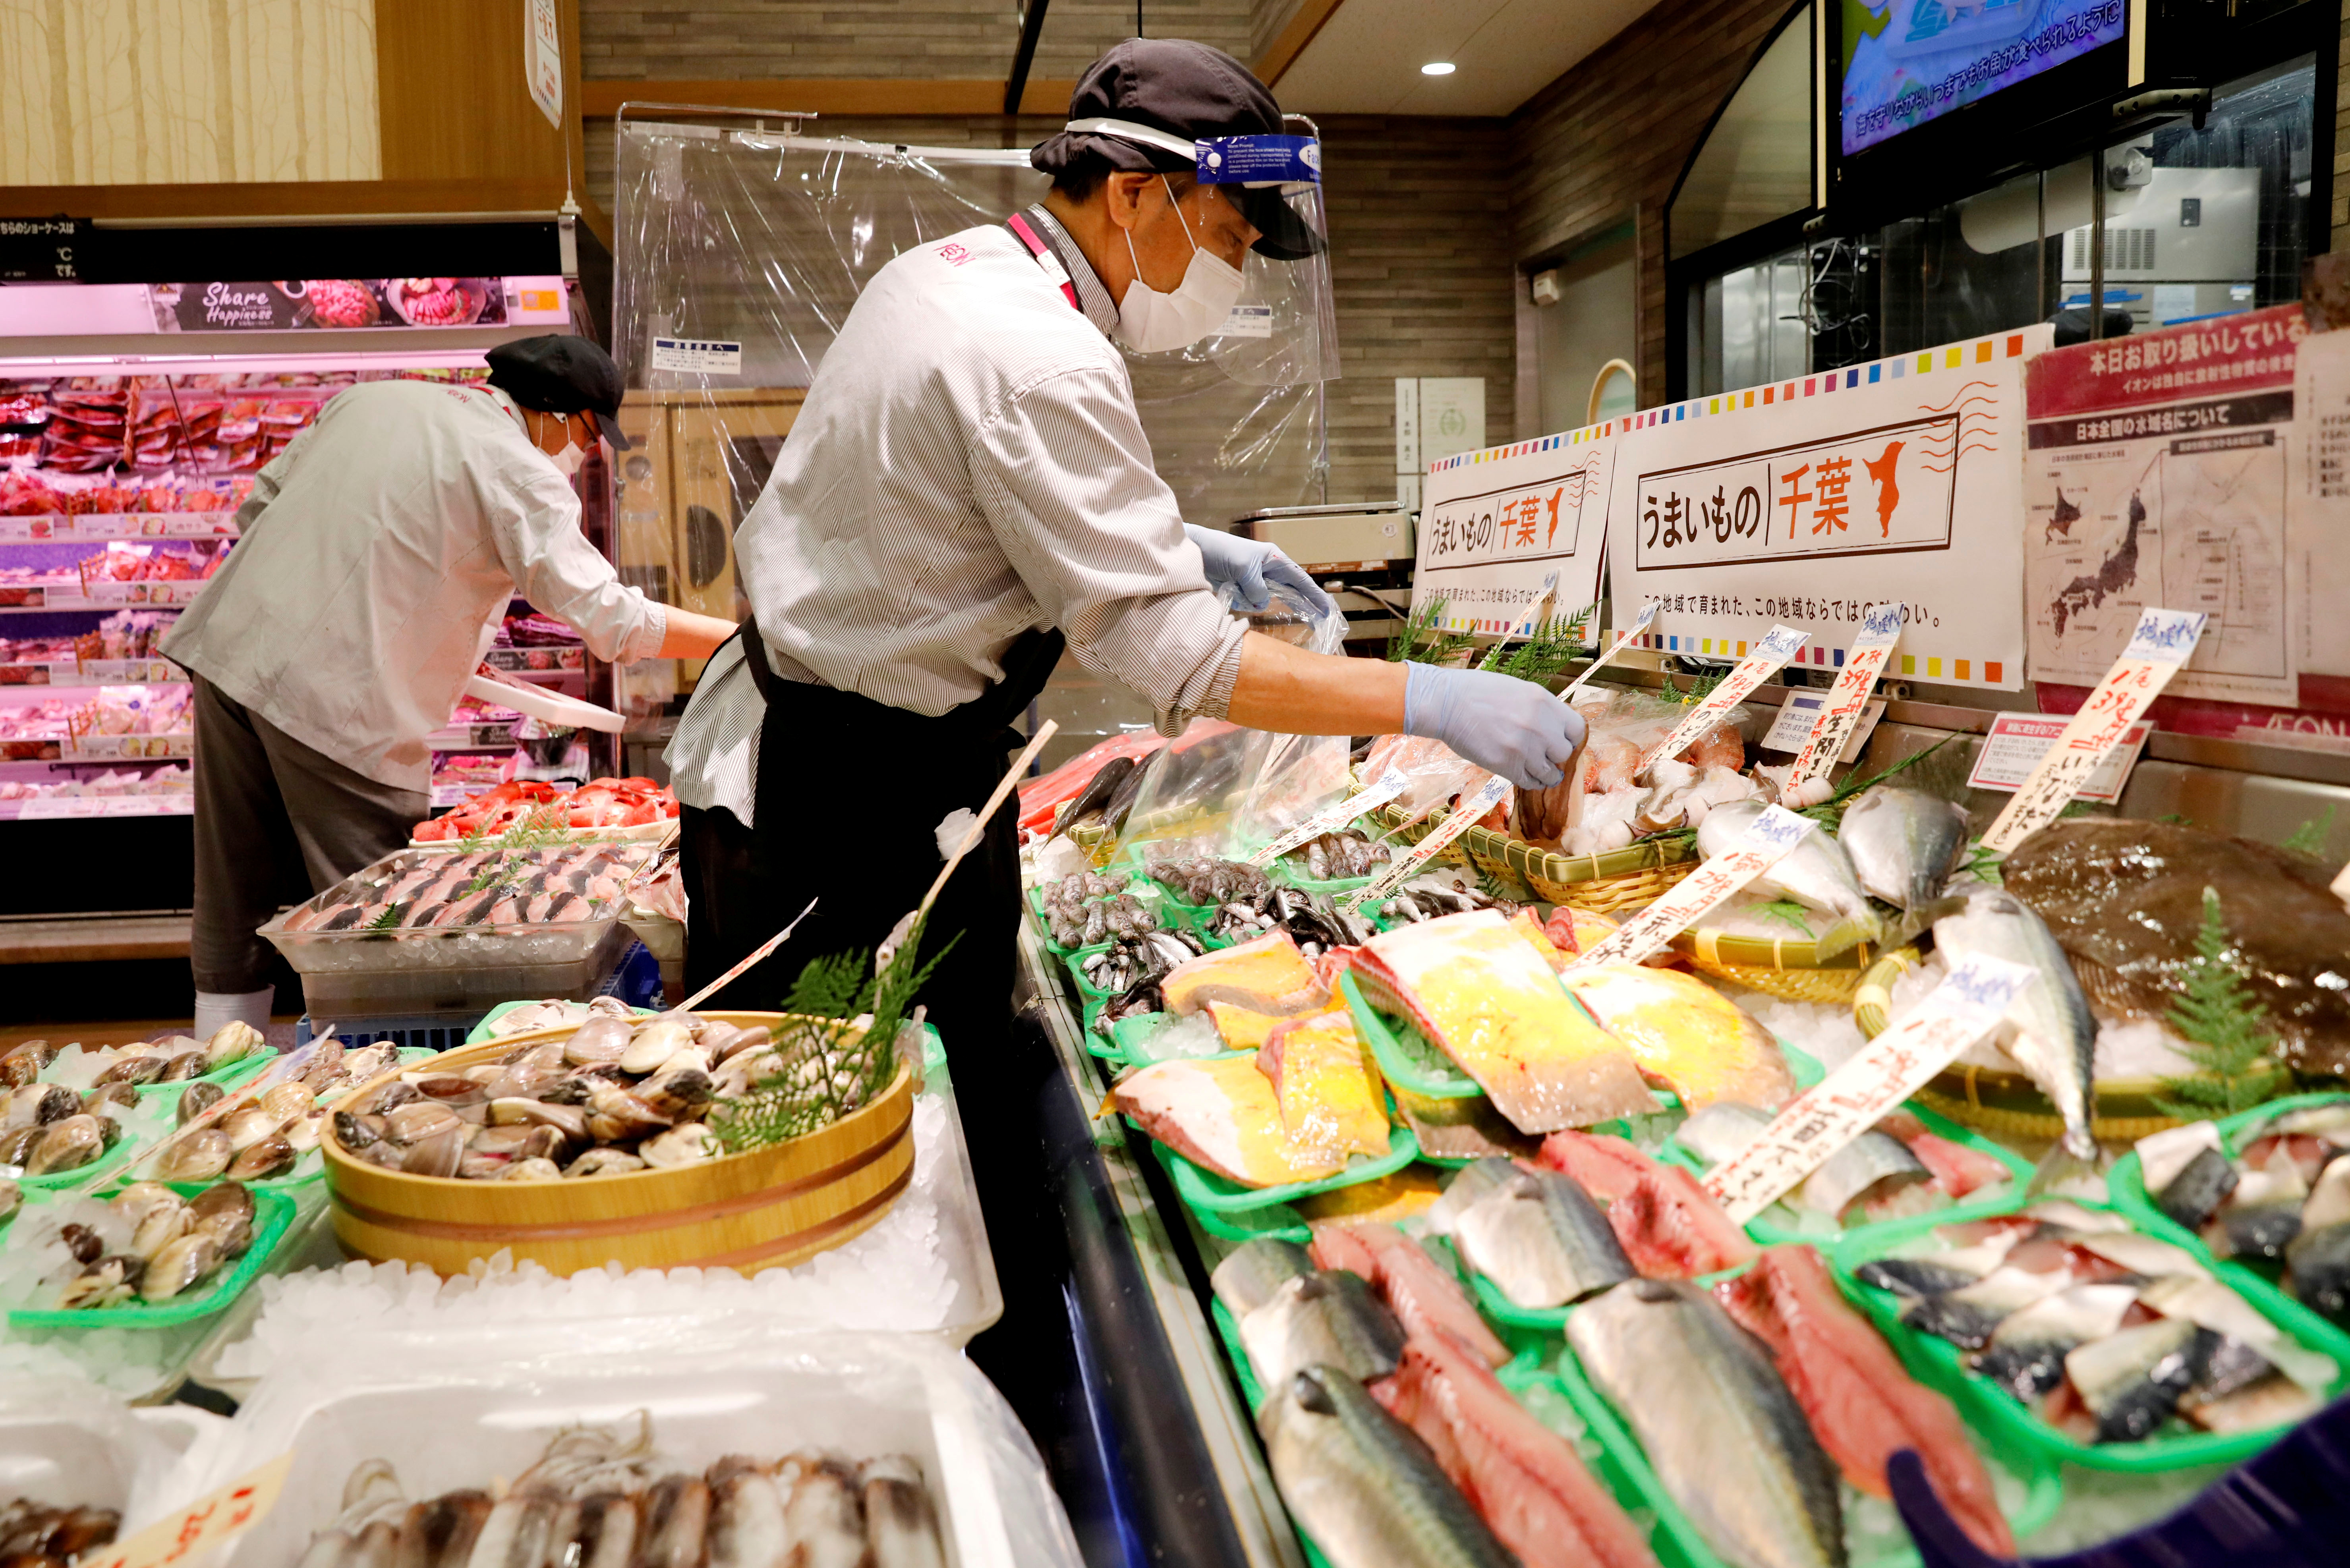 A staff wearing a face shield sells fish at Japan's supermarket group Aeon's shopping mall as the mall reopens amid the coronavirus disease (COVID-19) outbreak in Chiba, Japan May 28, 2020. REUTERS/Kim Kyung-Hoon/File Photo